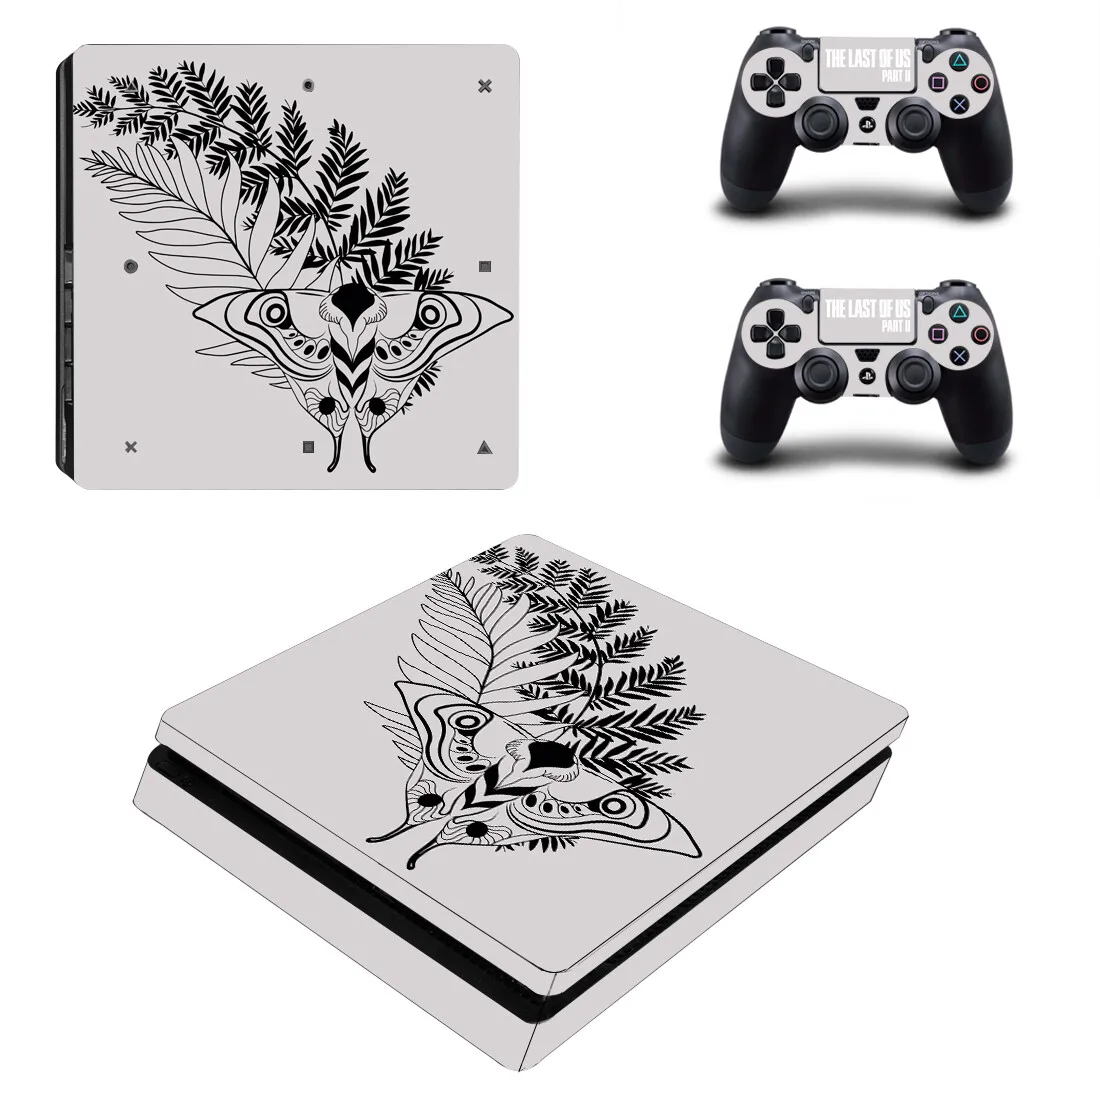 

The Last of Us PS4 Slim Skin Sticker For Sony PlayStation 4 Console and Controllers PS4 Slim Skins Sticker Decal Vinyl